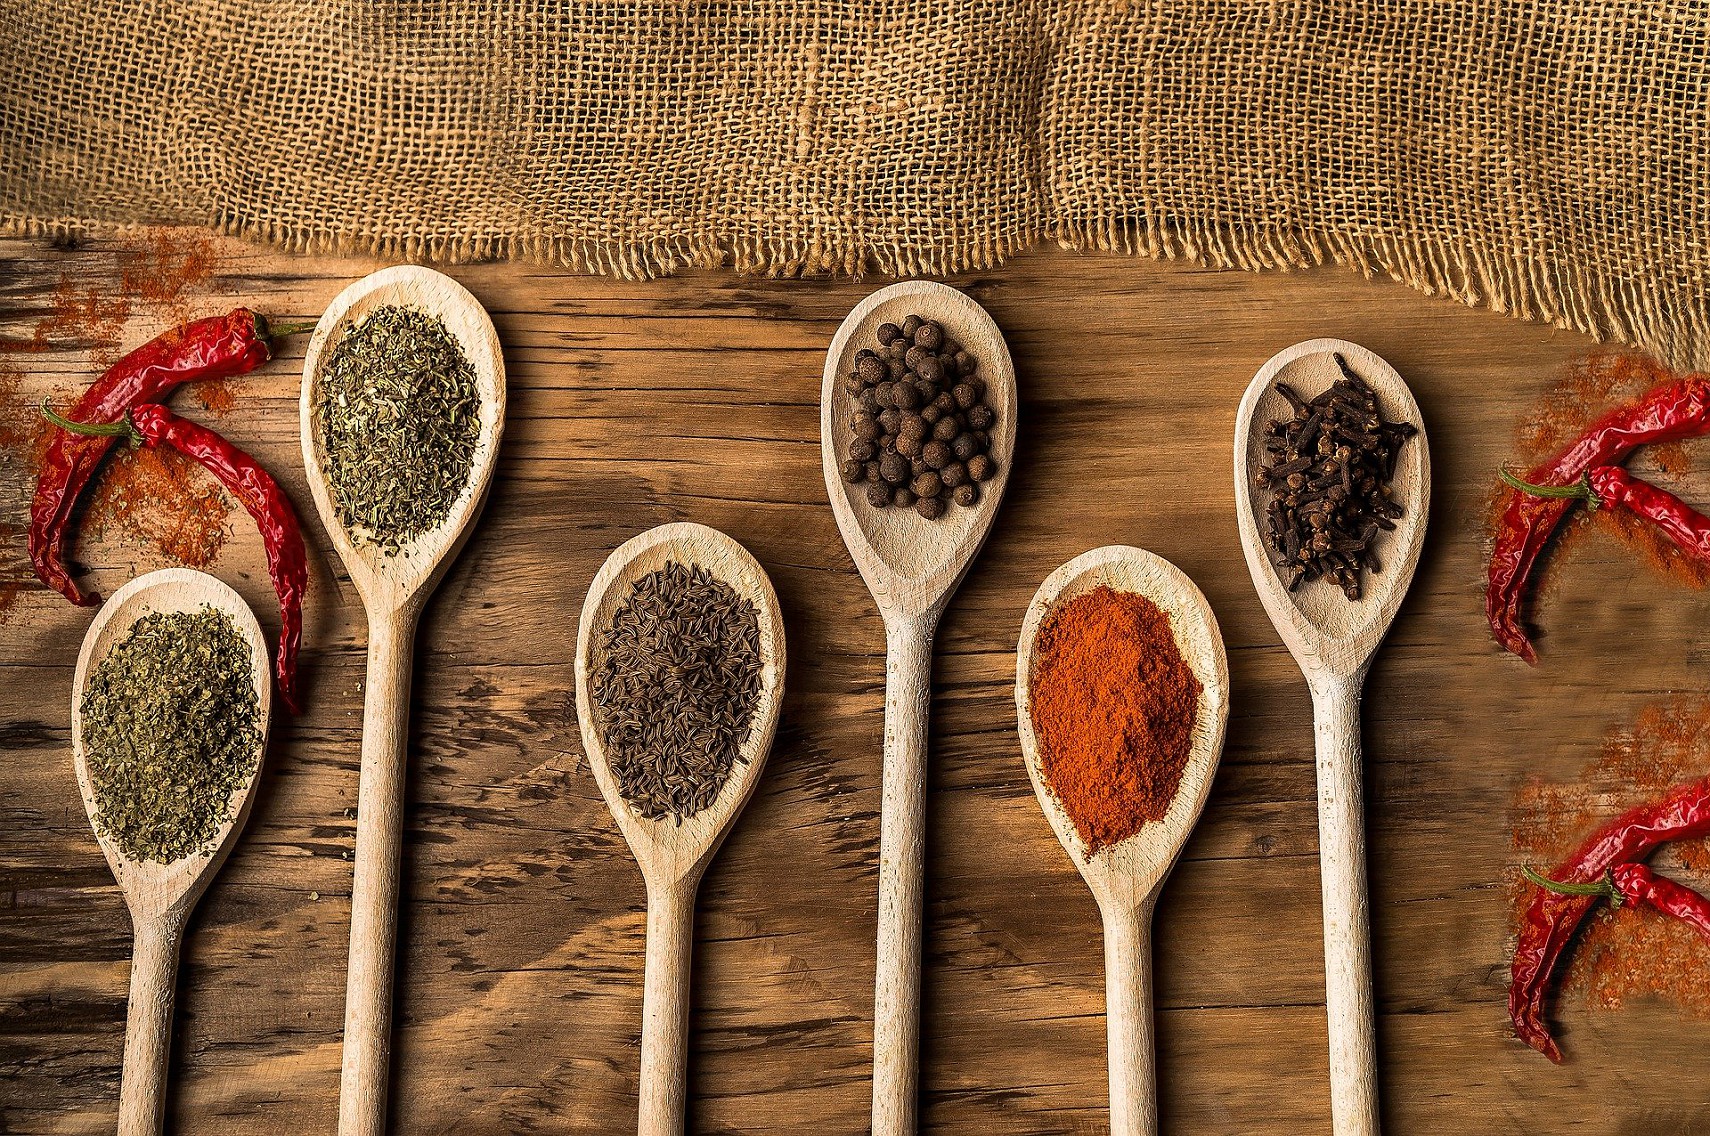 A series of wooden spoons, each holding a different spice, on a textured wooden background